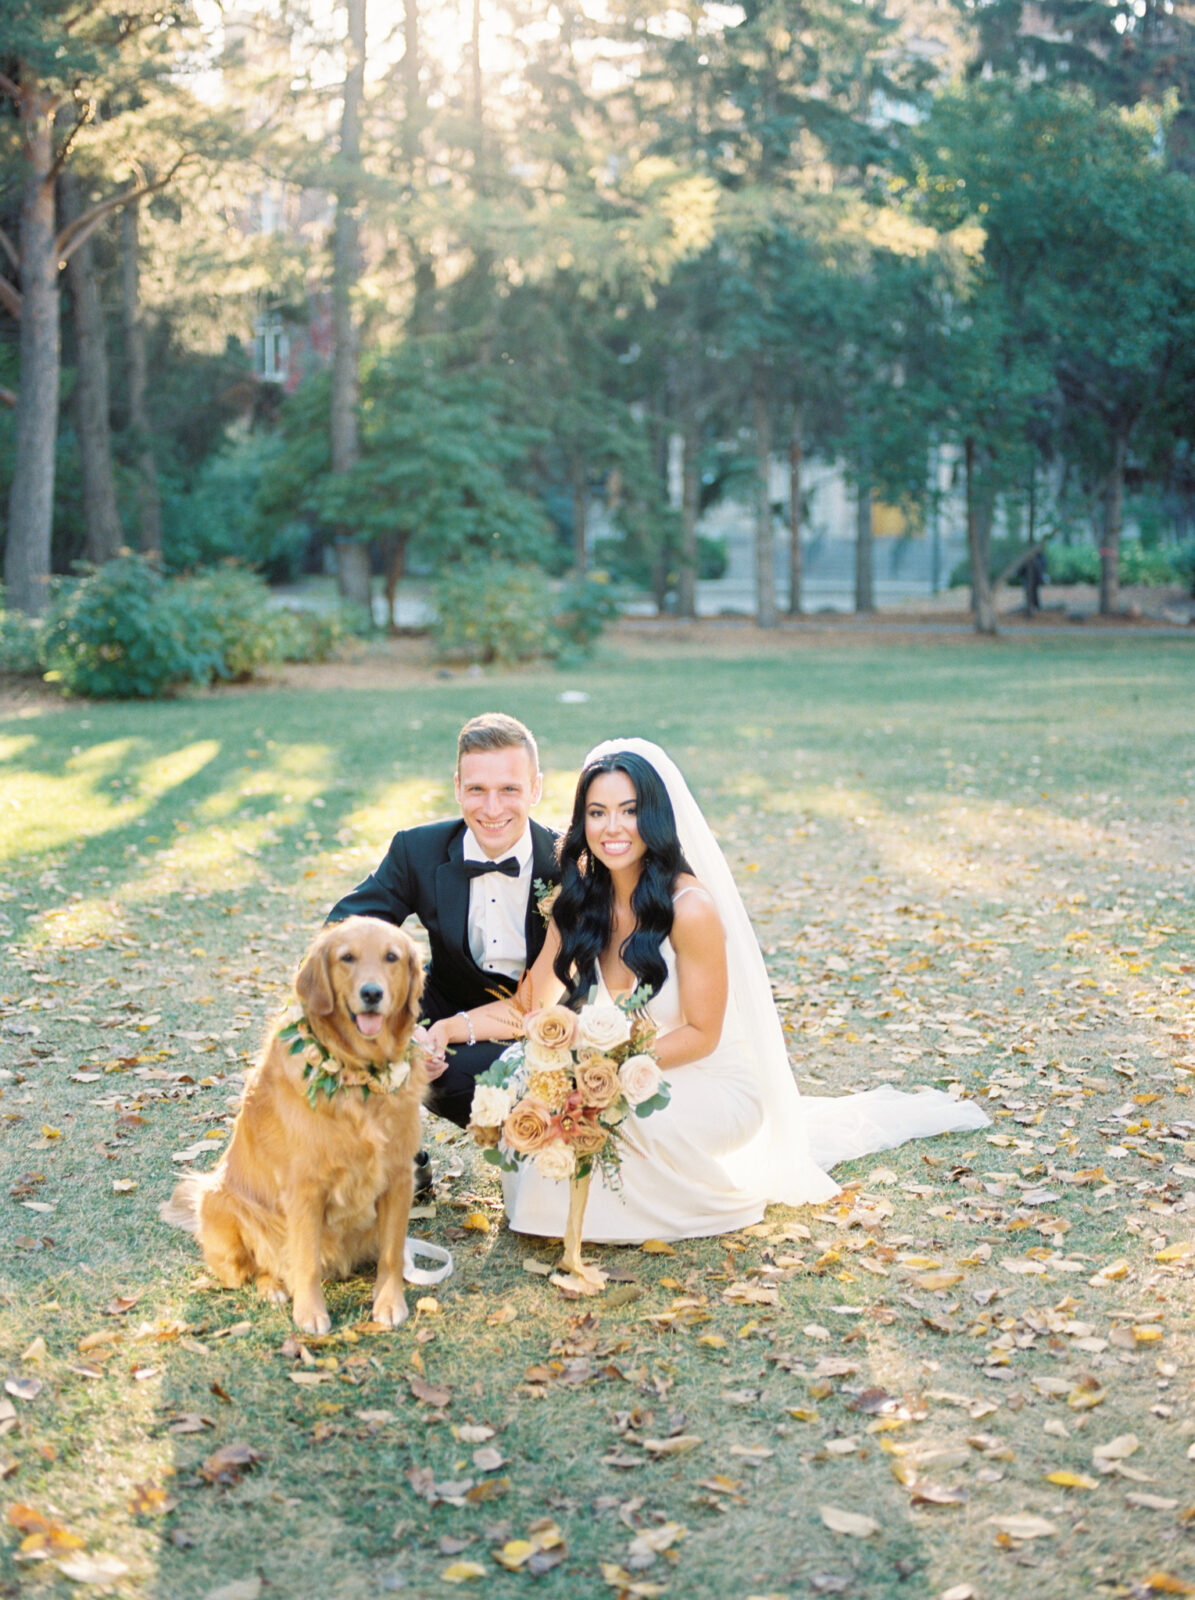 bride and groom portraits at sunset with golden retriever, leaves on the ground and the soft light of sunset for bride, picturesque park setting for outdoor fall portraits